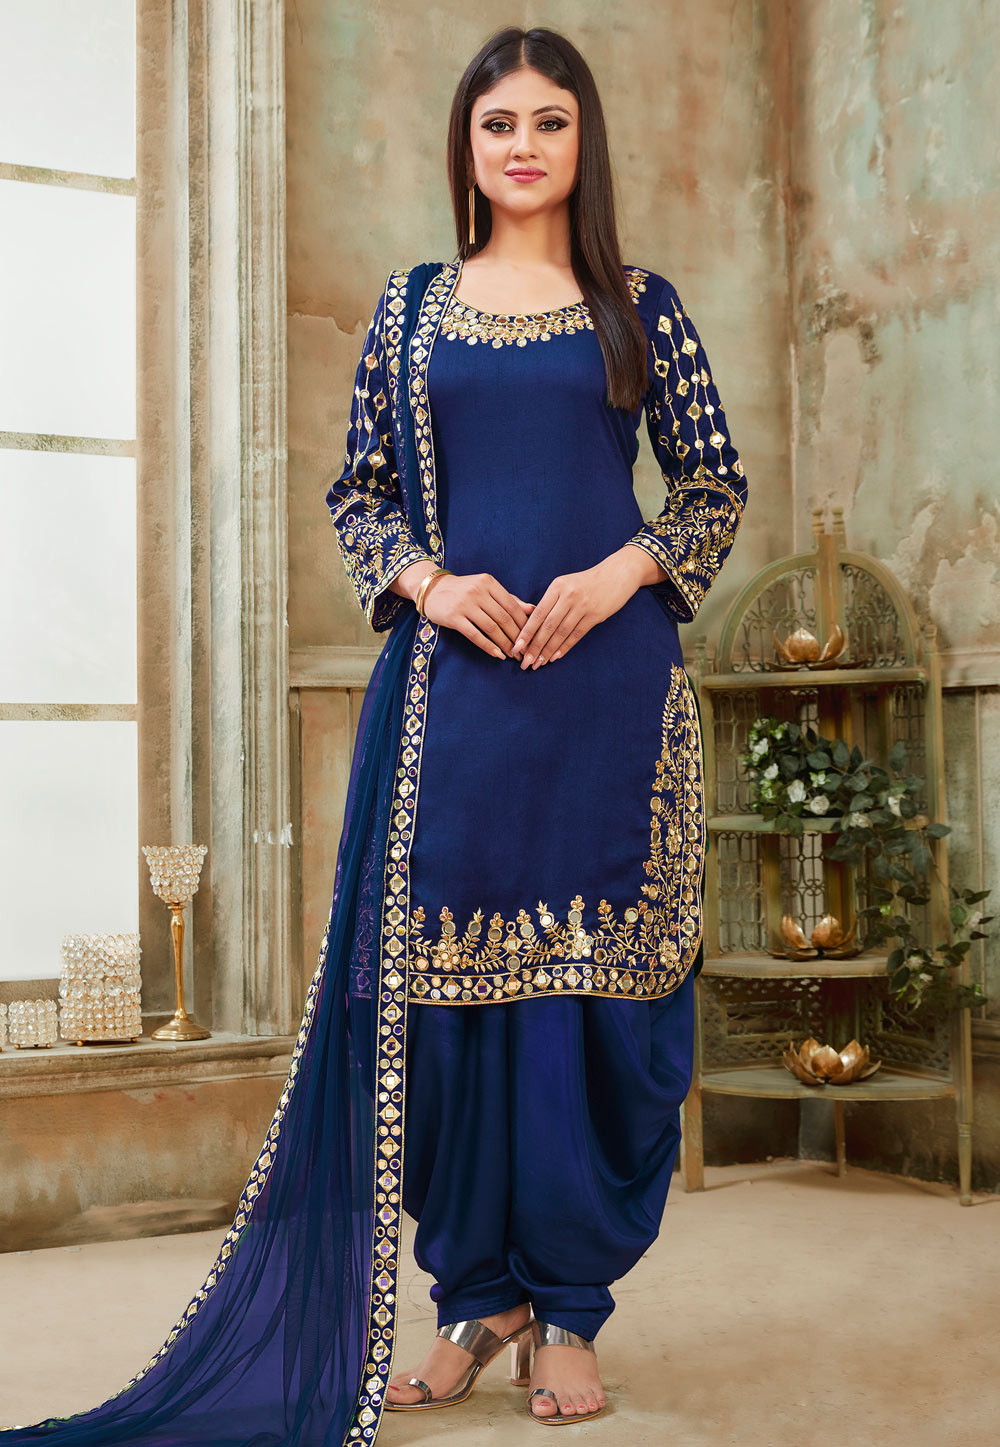 Shop Full Sleeve Punjabi Suits and Dresses Online at Indian Cloth Store